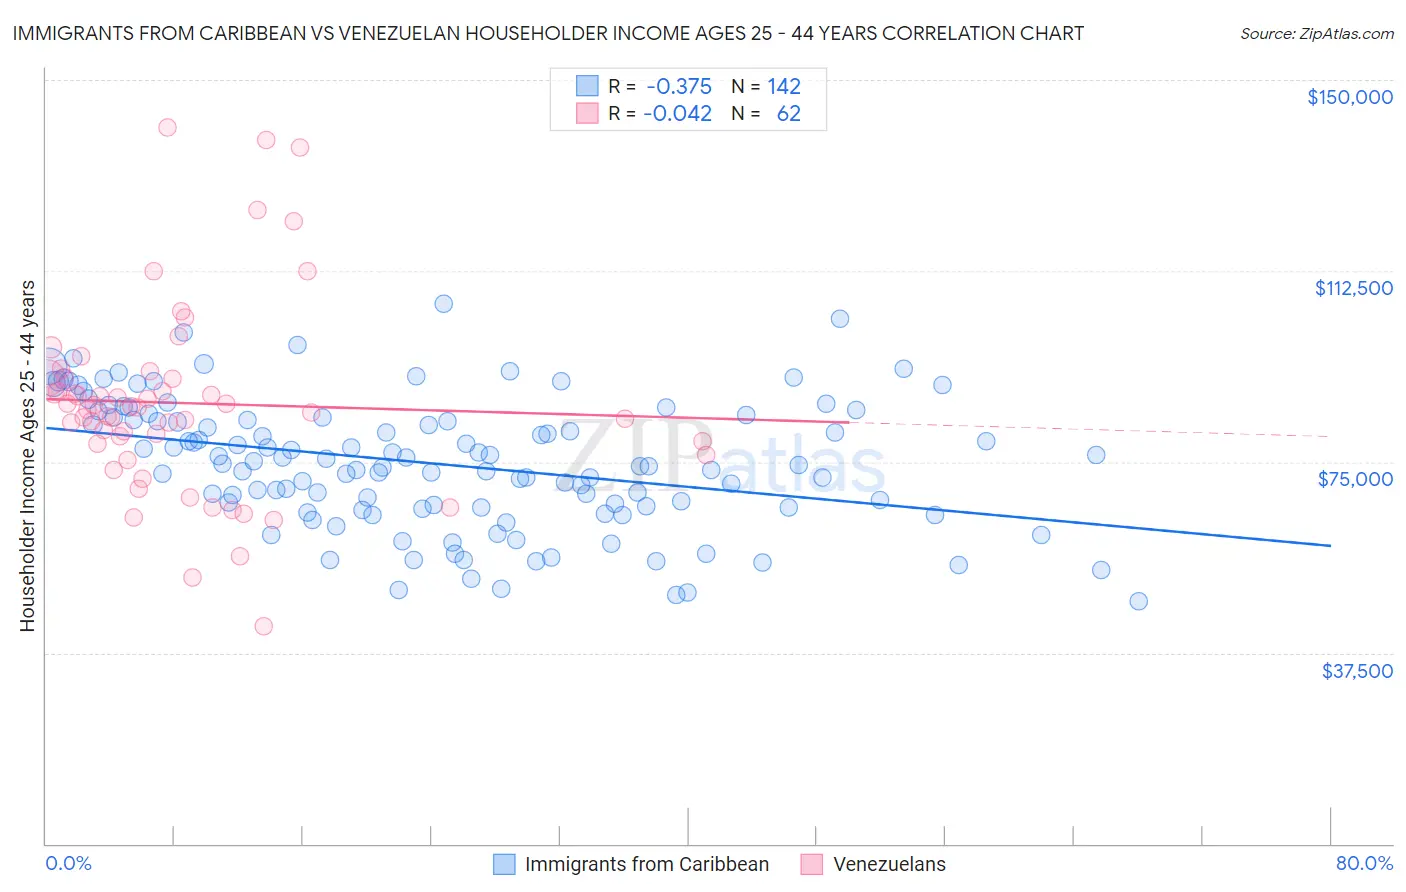 Immigrants from Caribbean vs Venezuelan Householder Income Ages 25 - 44 years